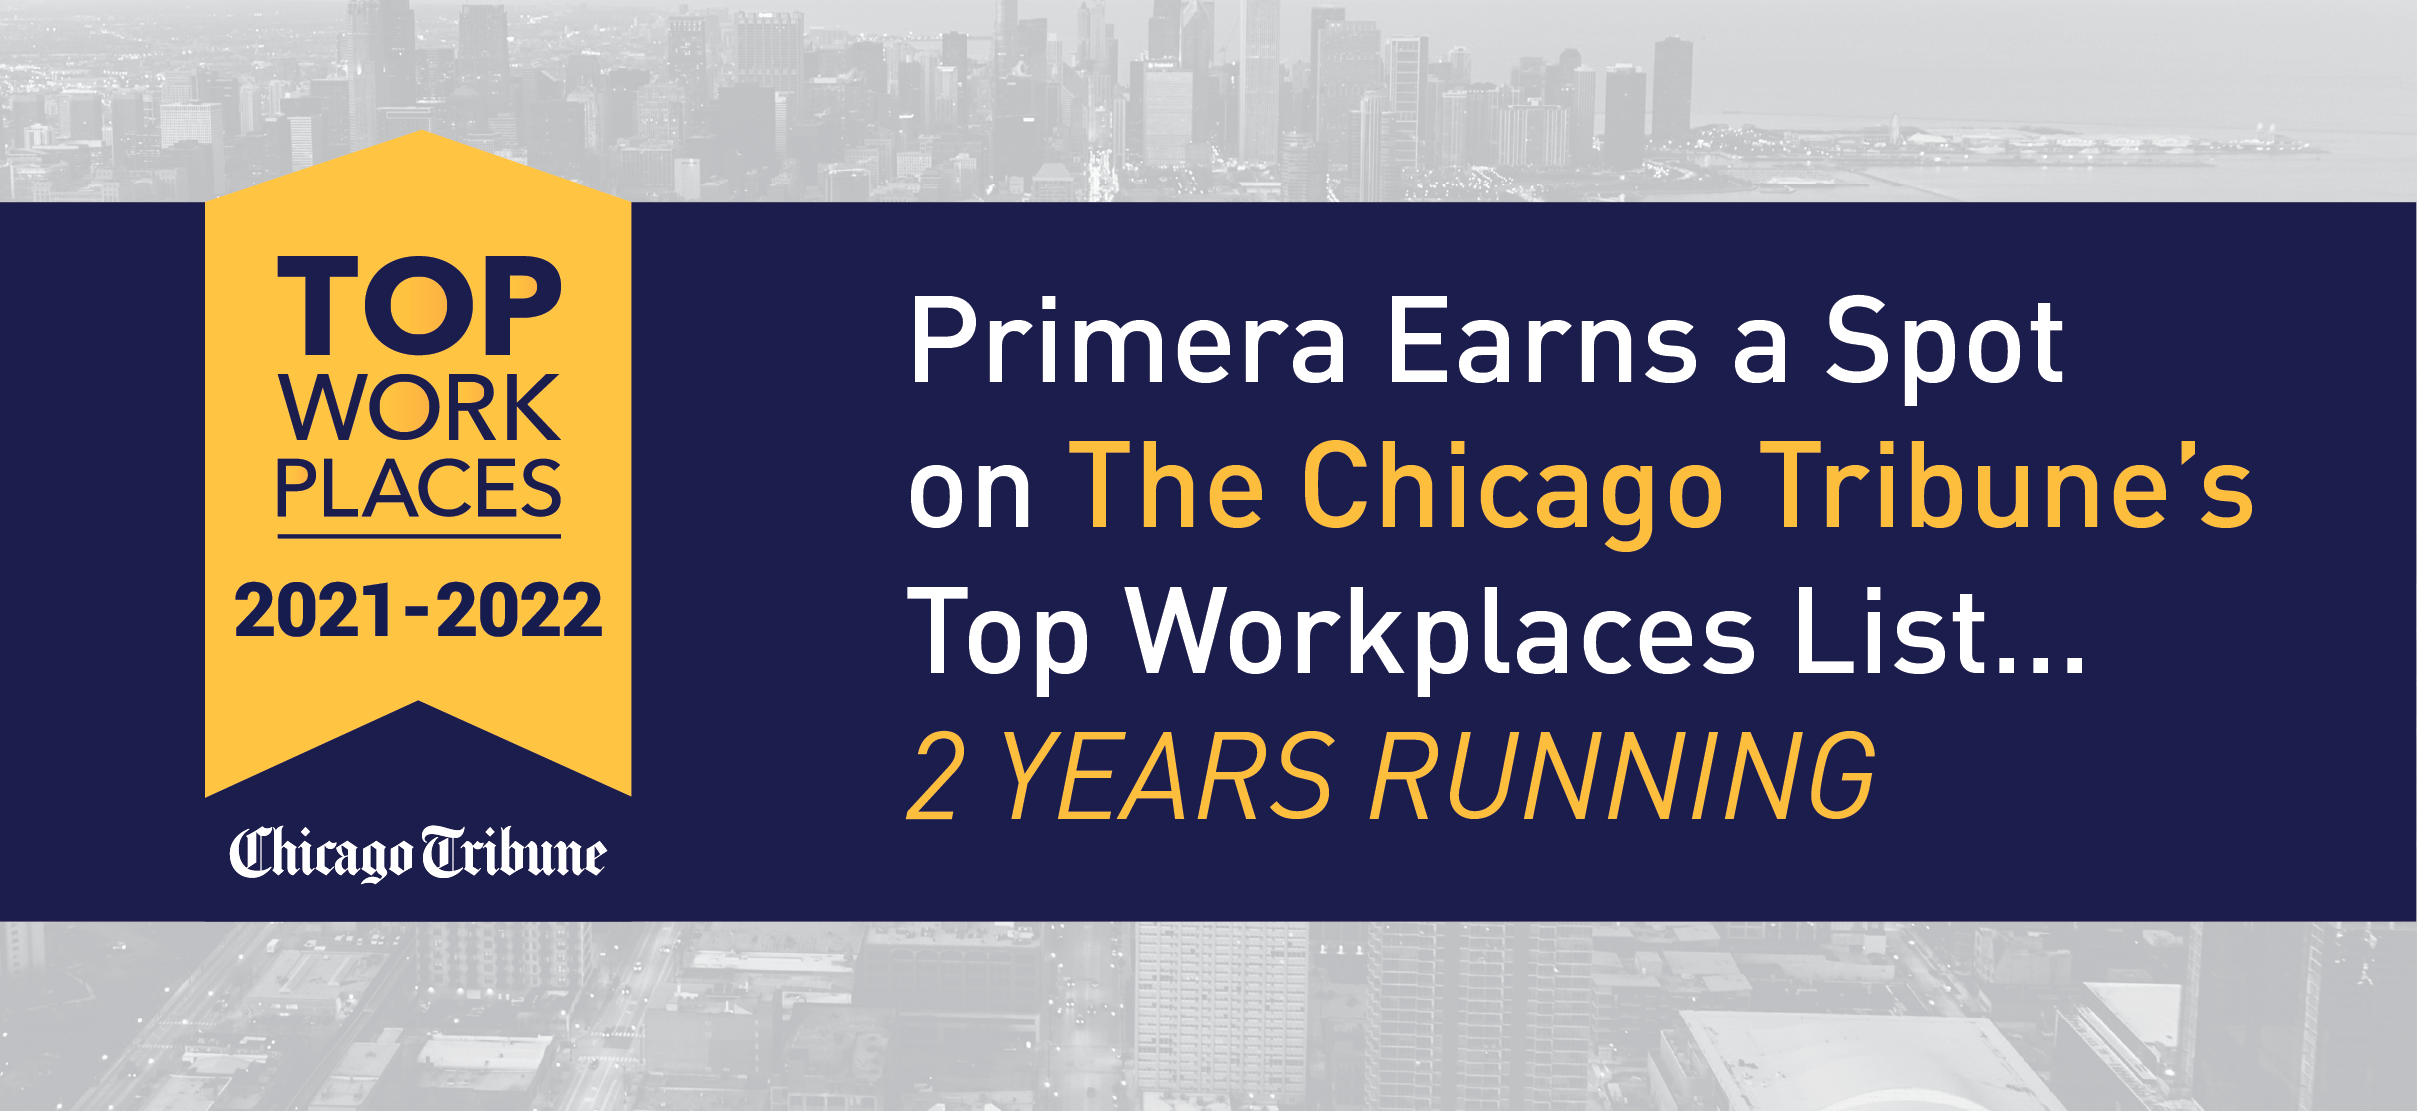 Primera Listed among The Chicago Tribune’s Top Workplaces for 2022